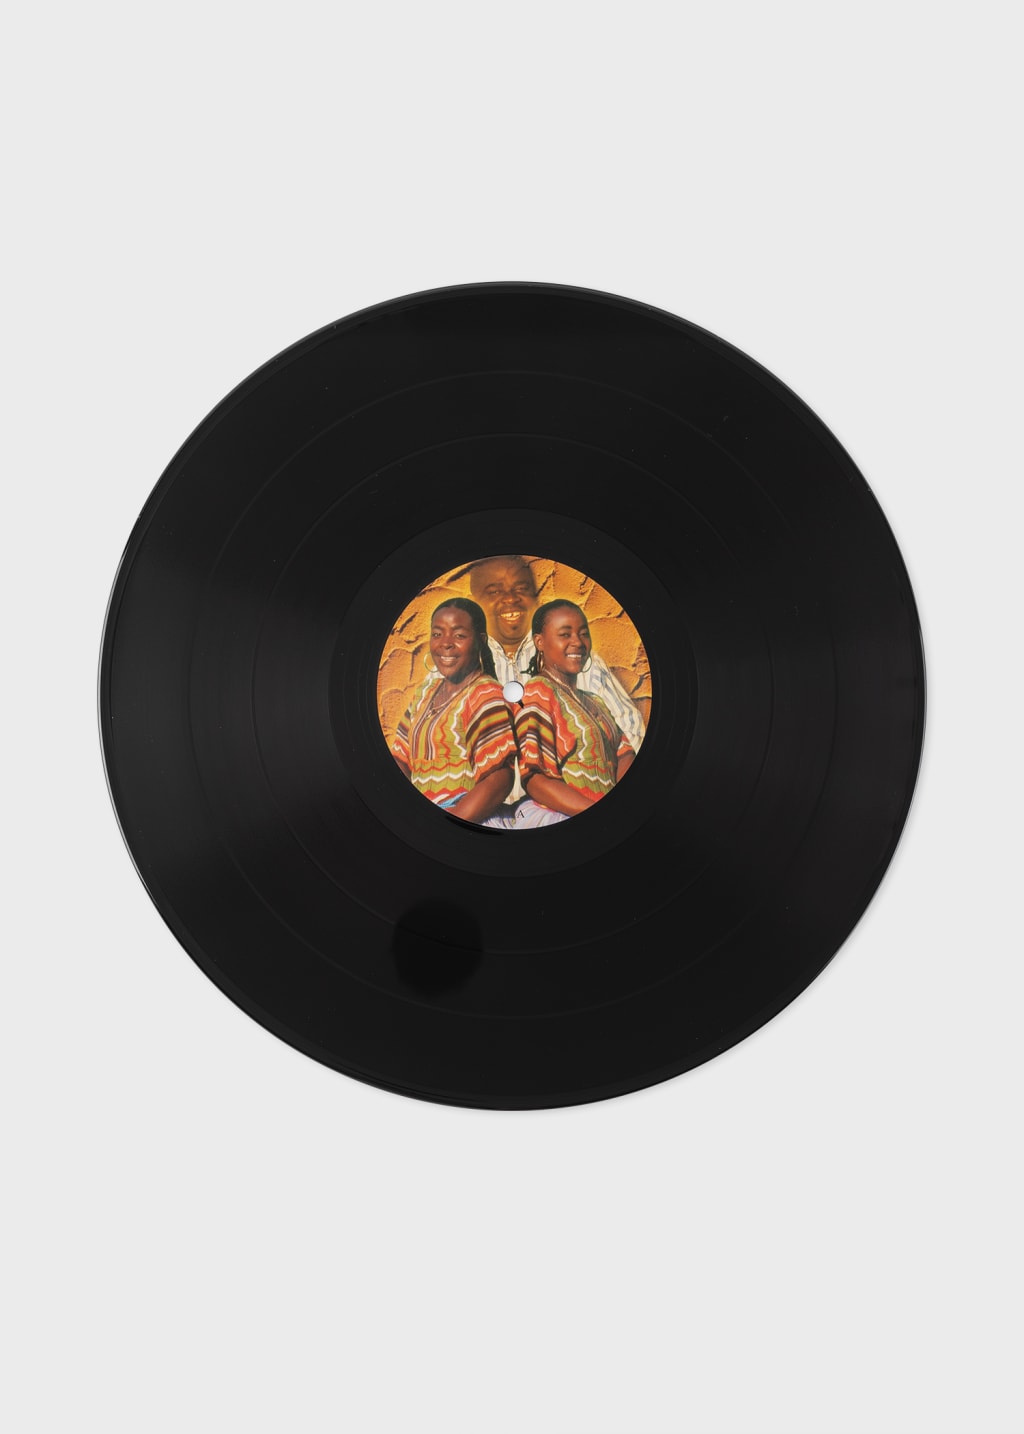 Product view - Shangaan Electro - New Wave Dance Music From South Africa,  Vinyl 2 x LP